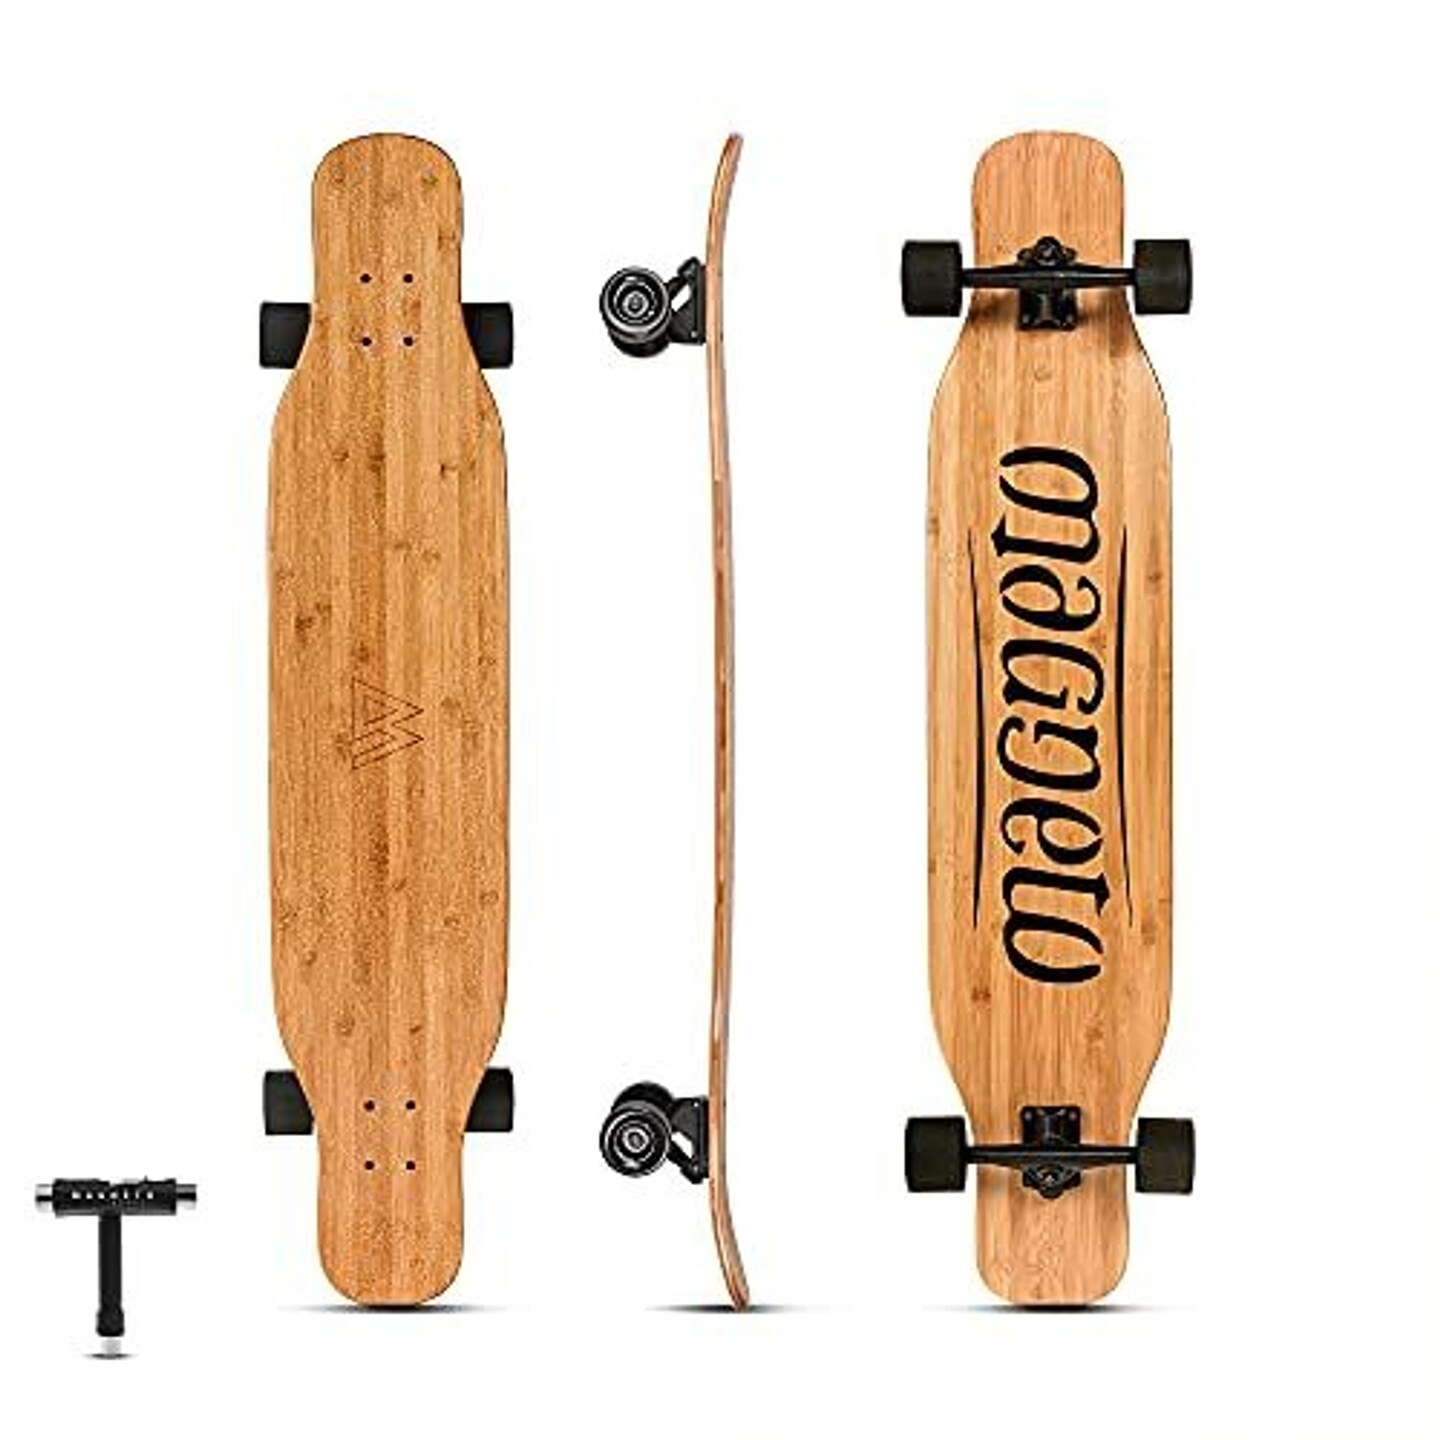 Magneto Bamboo Carbon Fiber Longboard Skateboard | 46&#x201D; x 9.5&#x201D; | Cruising, Carving, Downhill and Dancing | Kicktails Tricks Carver Drop Through | Great for Teens Adults Men Women | Free Skate Tool